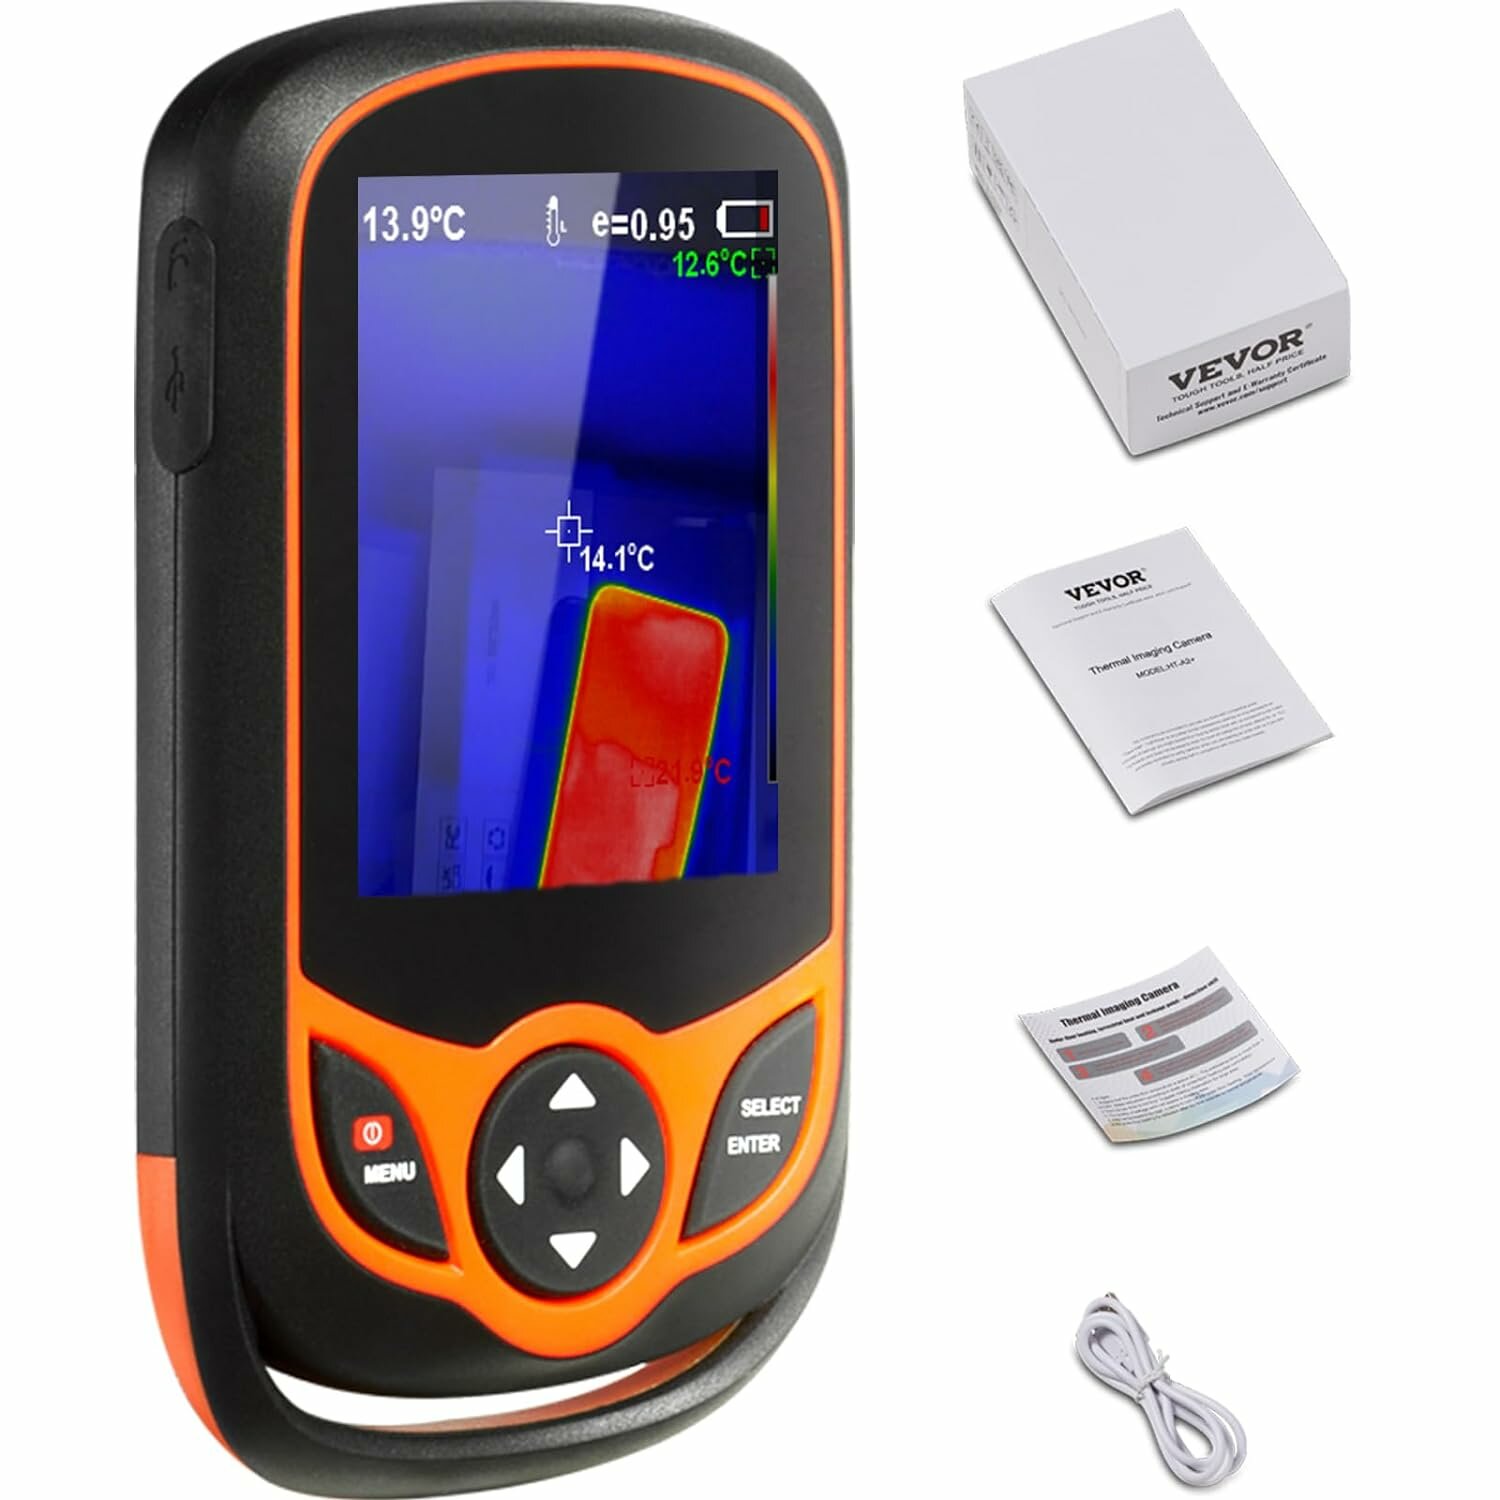 best price,ht,a2+,256x192,thermal,imaging,wifi,camera,discount